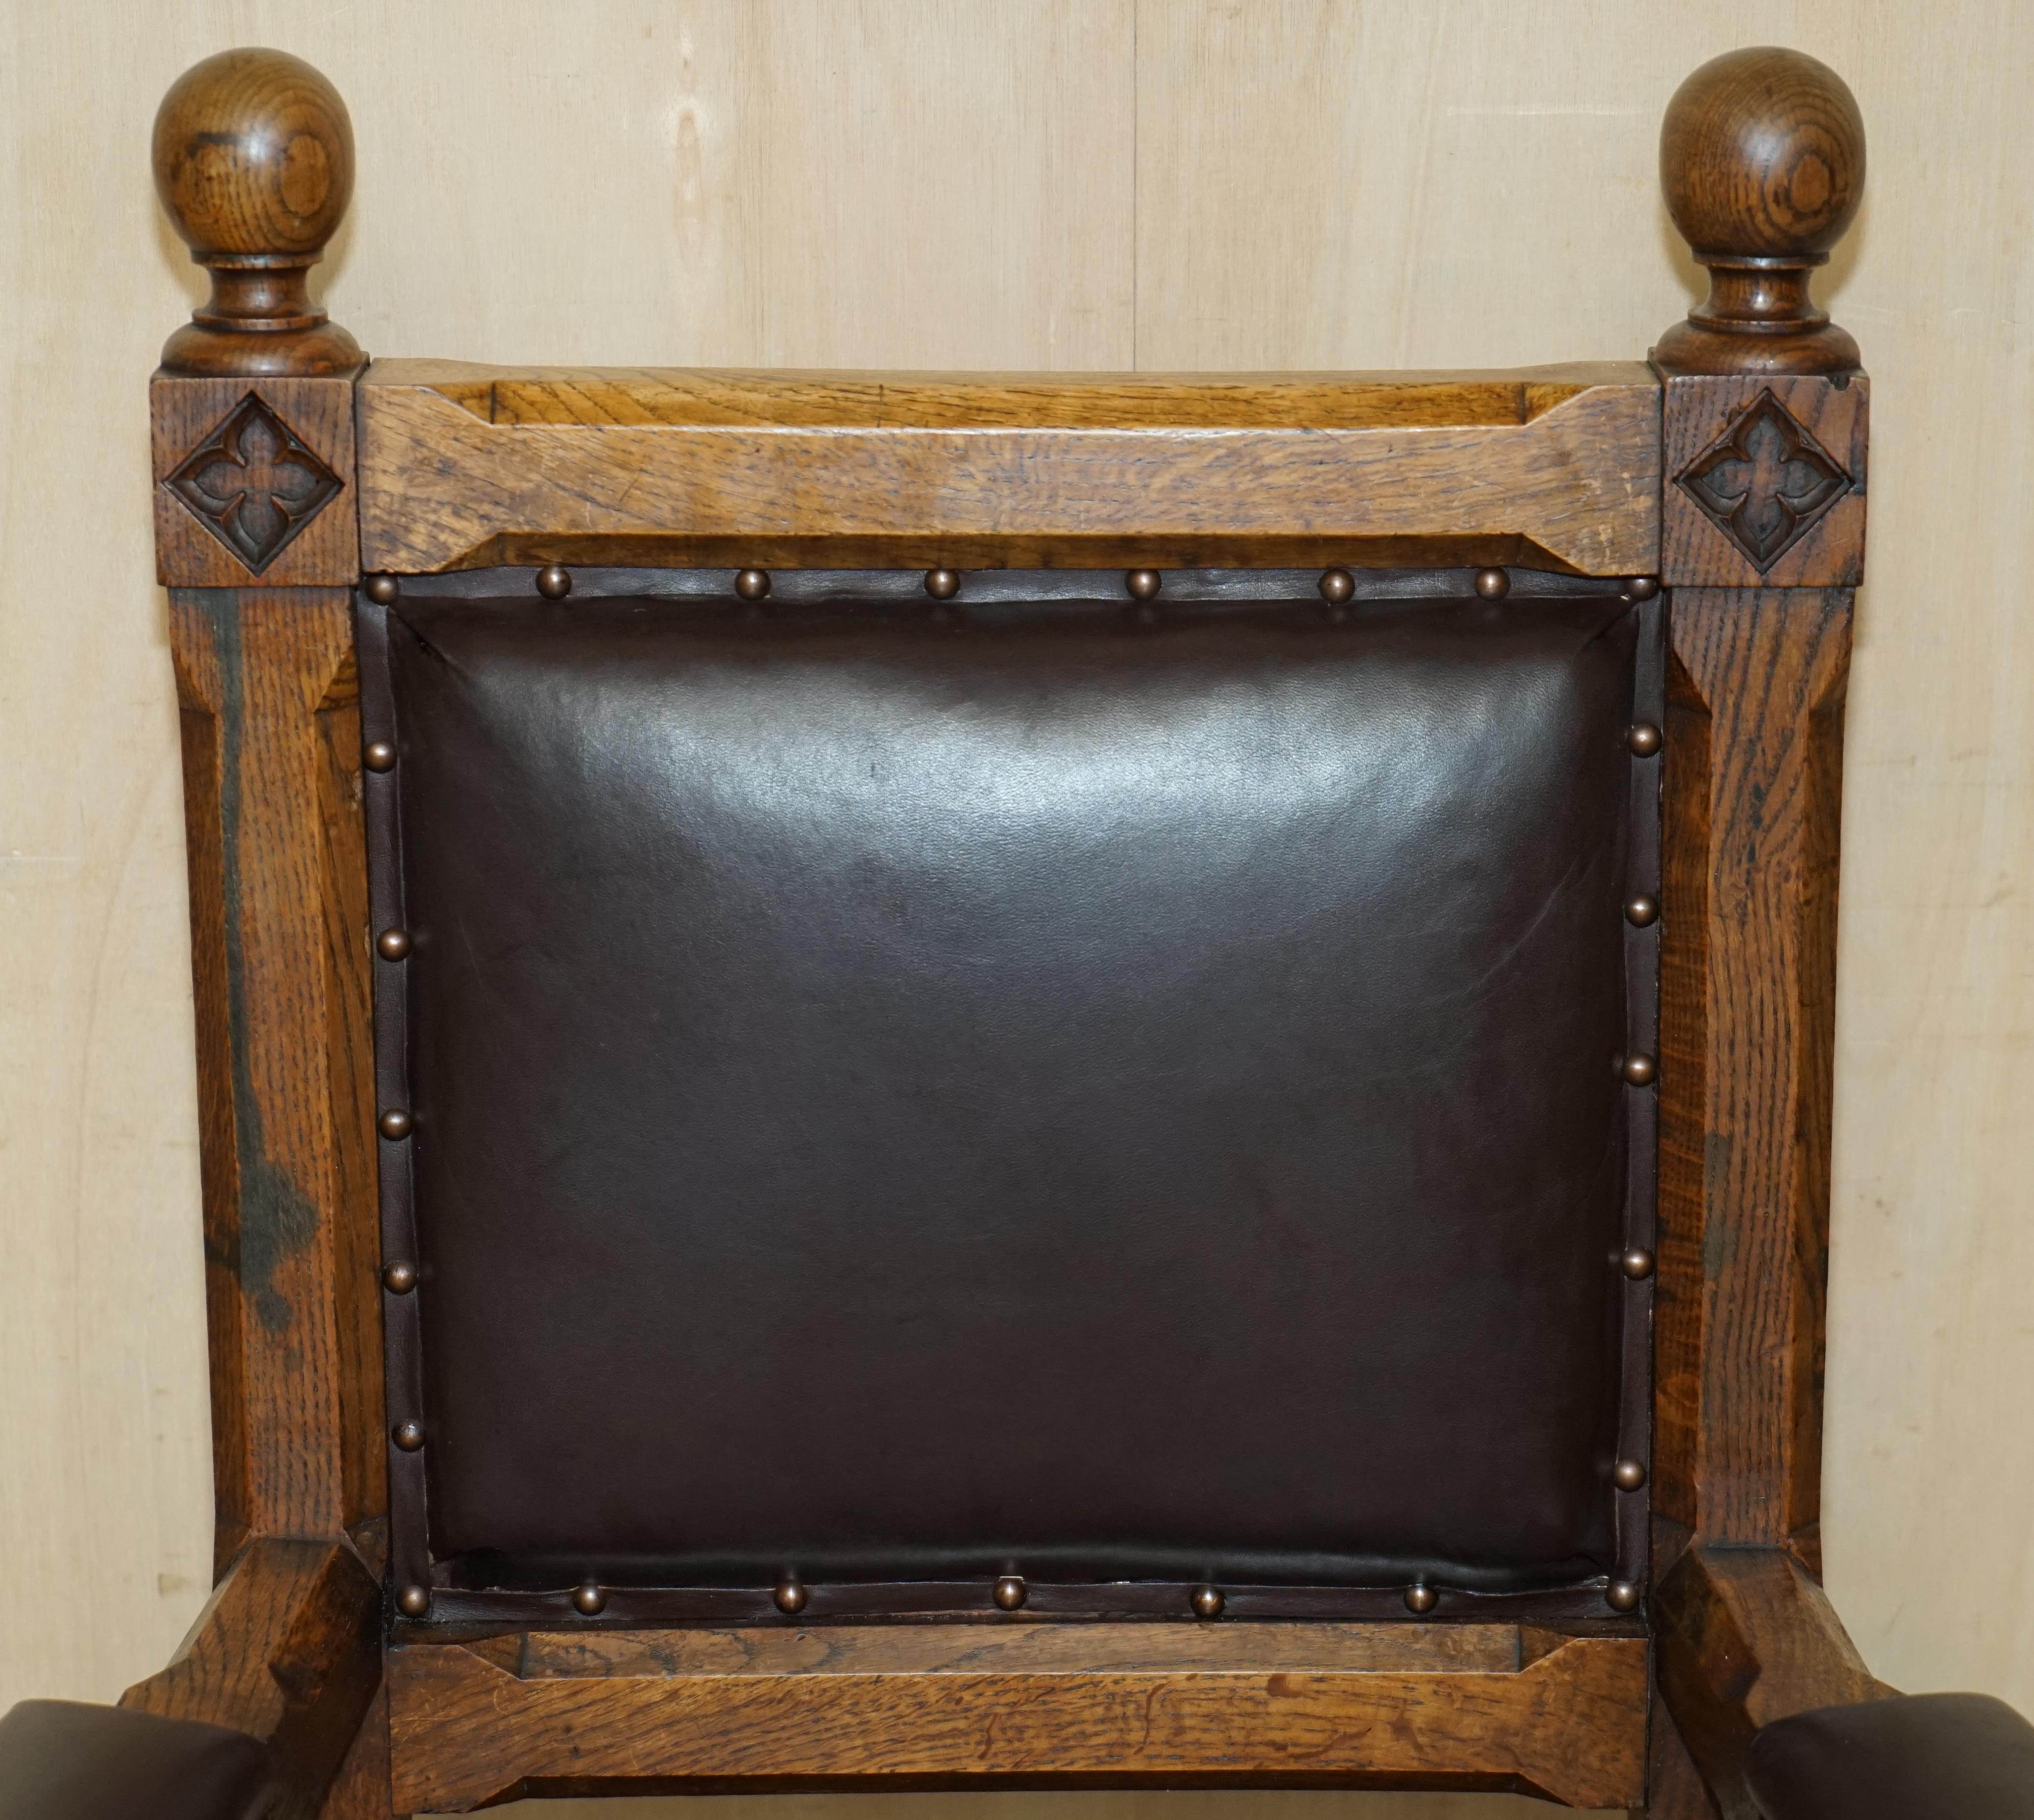 Gothic Revival STUNNING ANTIQUE CIRCA 1880 GOTHIC REViVAL OAK PUGIN STYLE CARVER ARMCHAIR